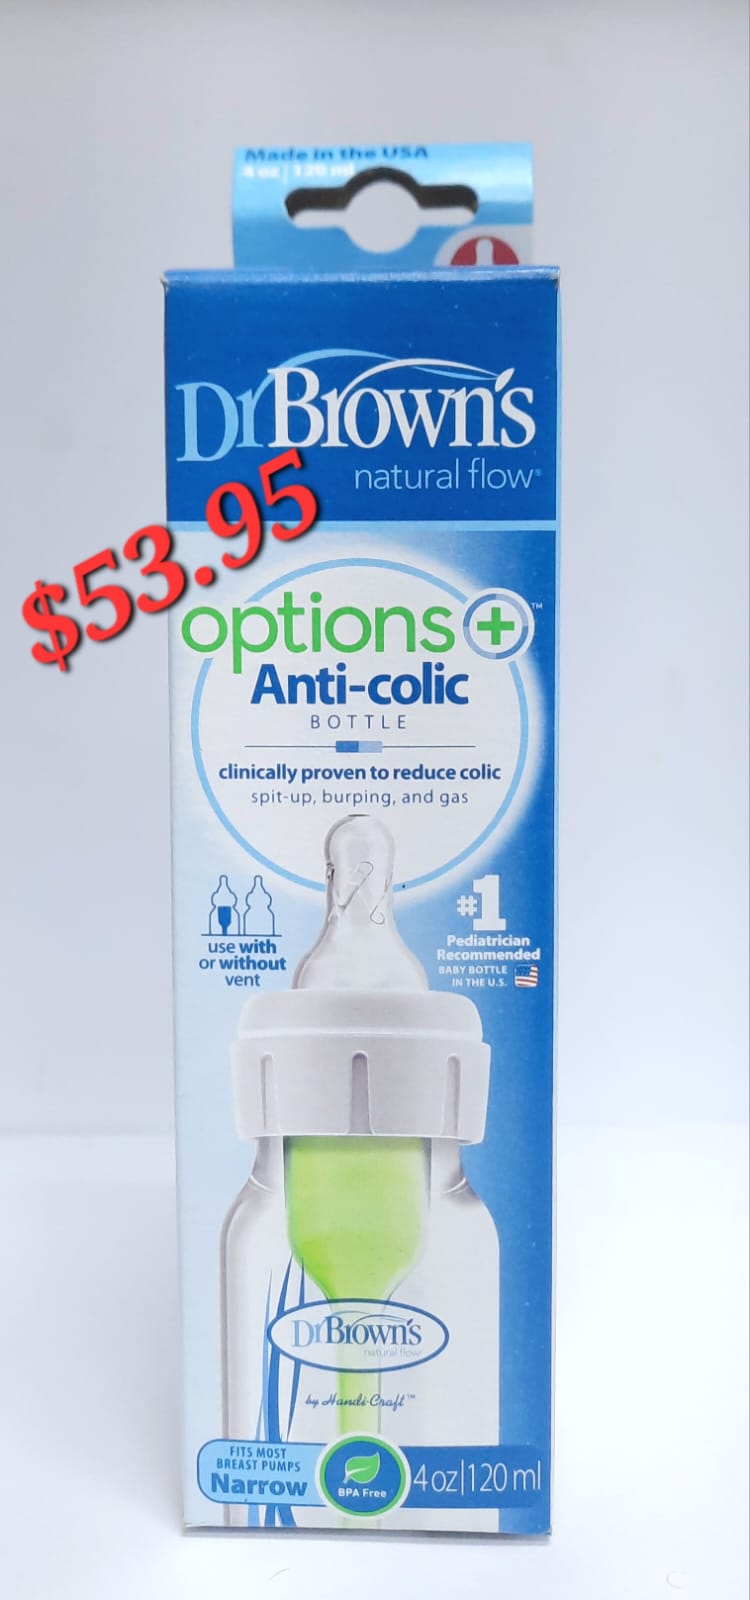 Dr. Brown's Anti-colic bottle